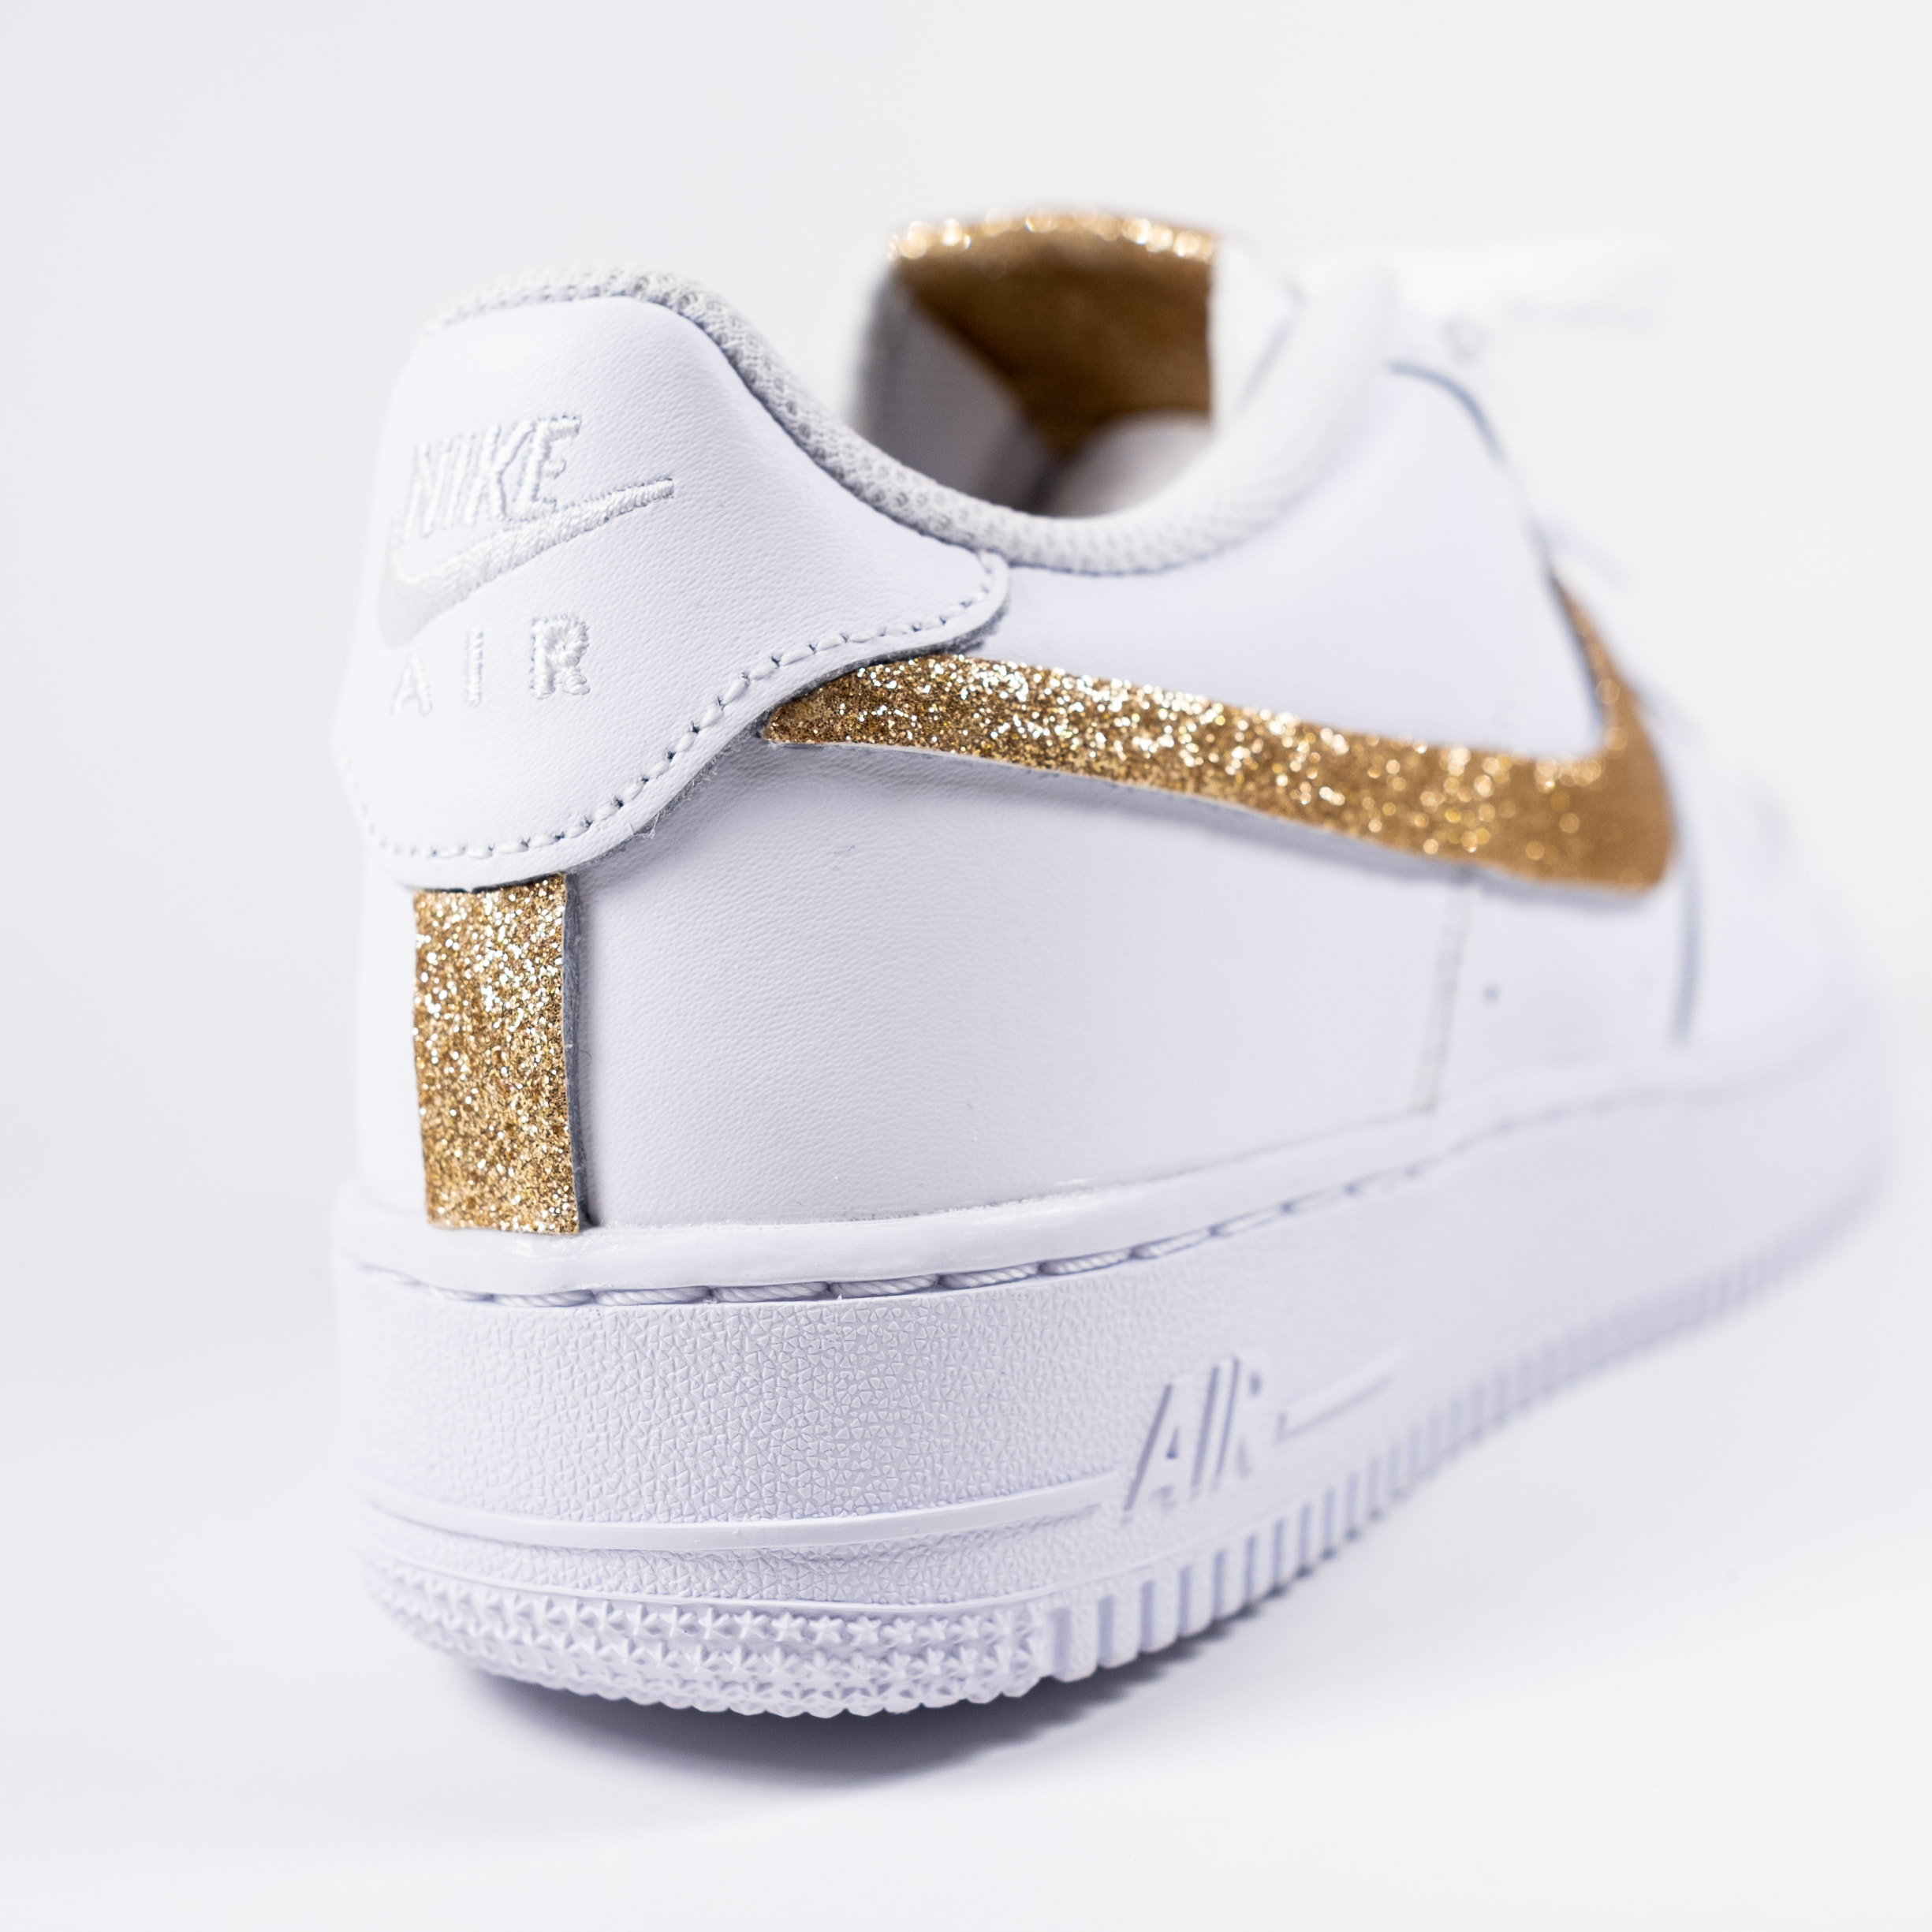 Custom Nike Air Force 1 with white doodles and gold